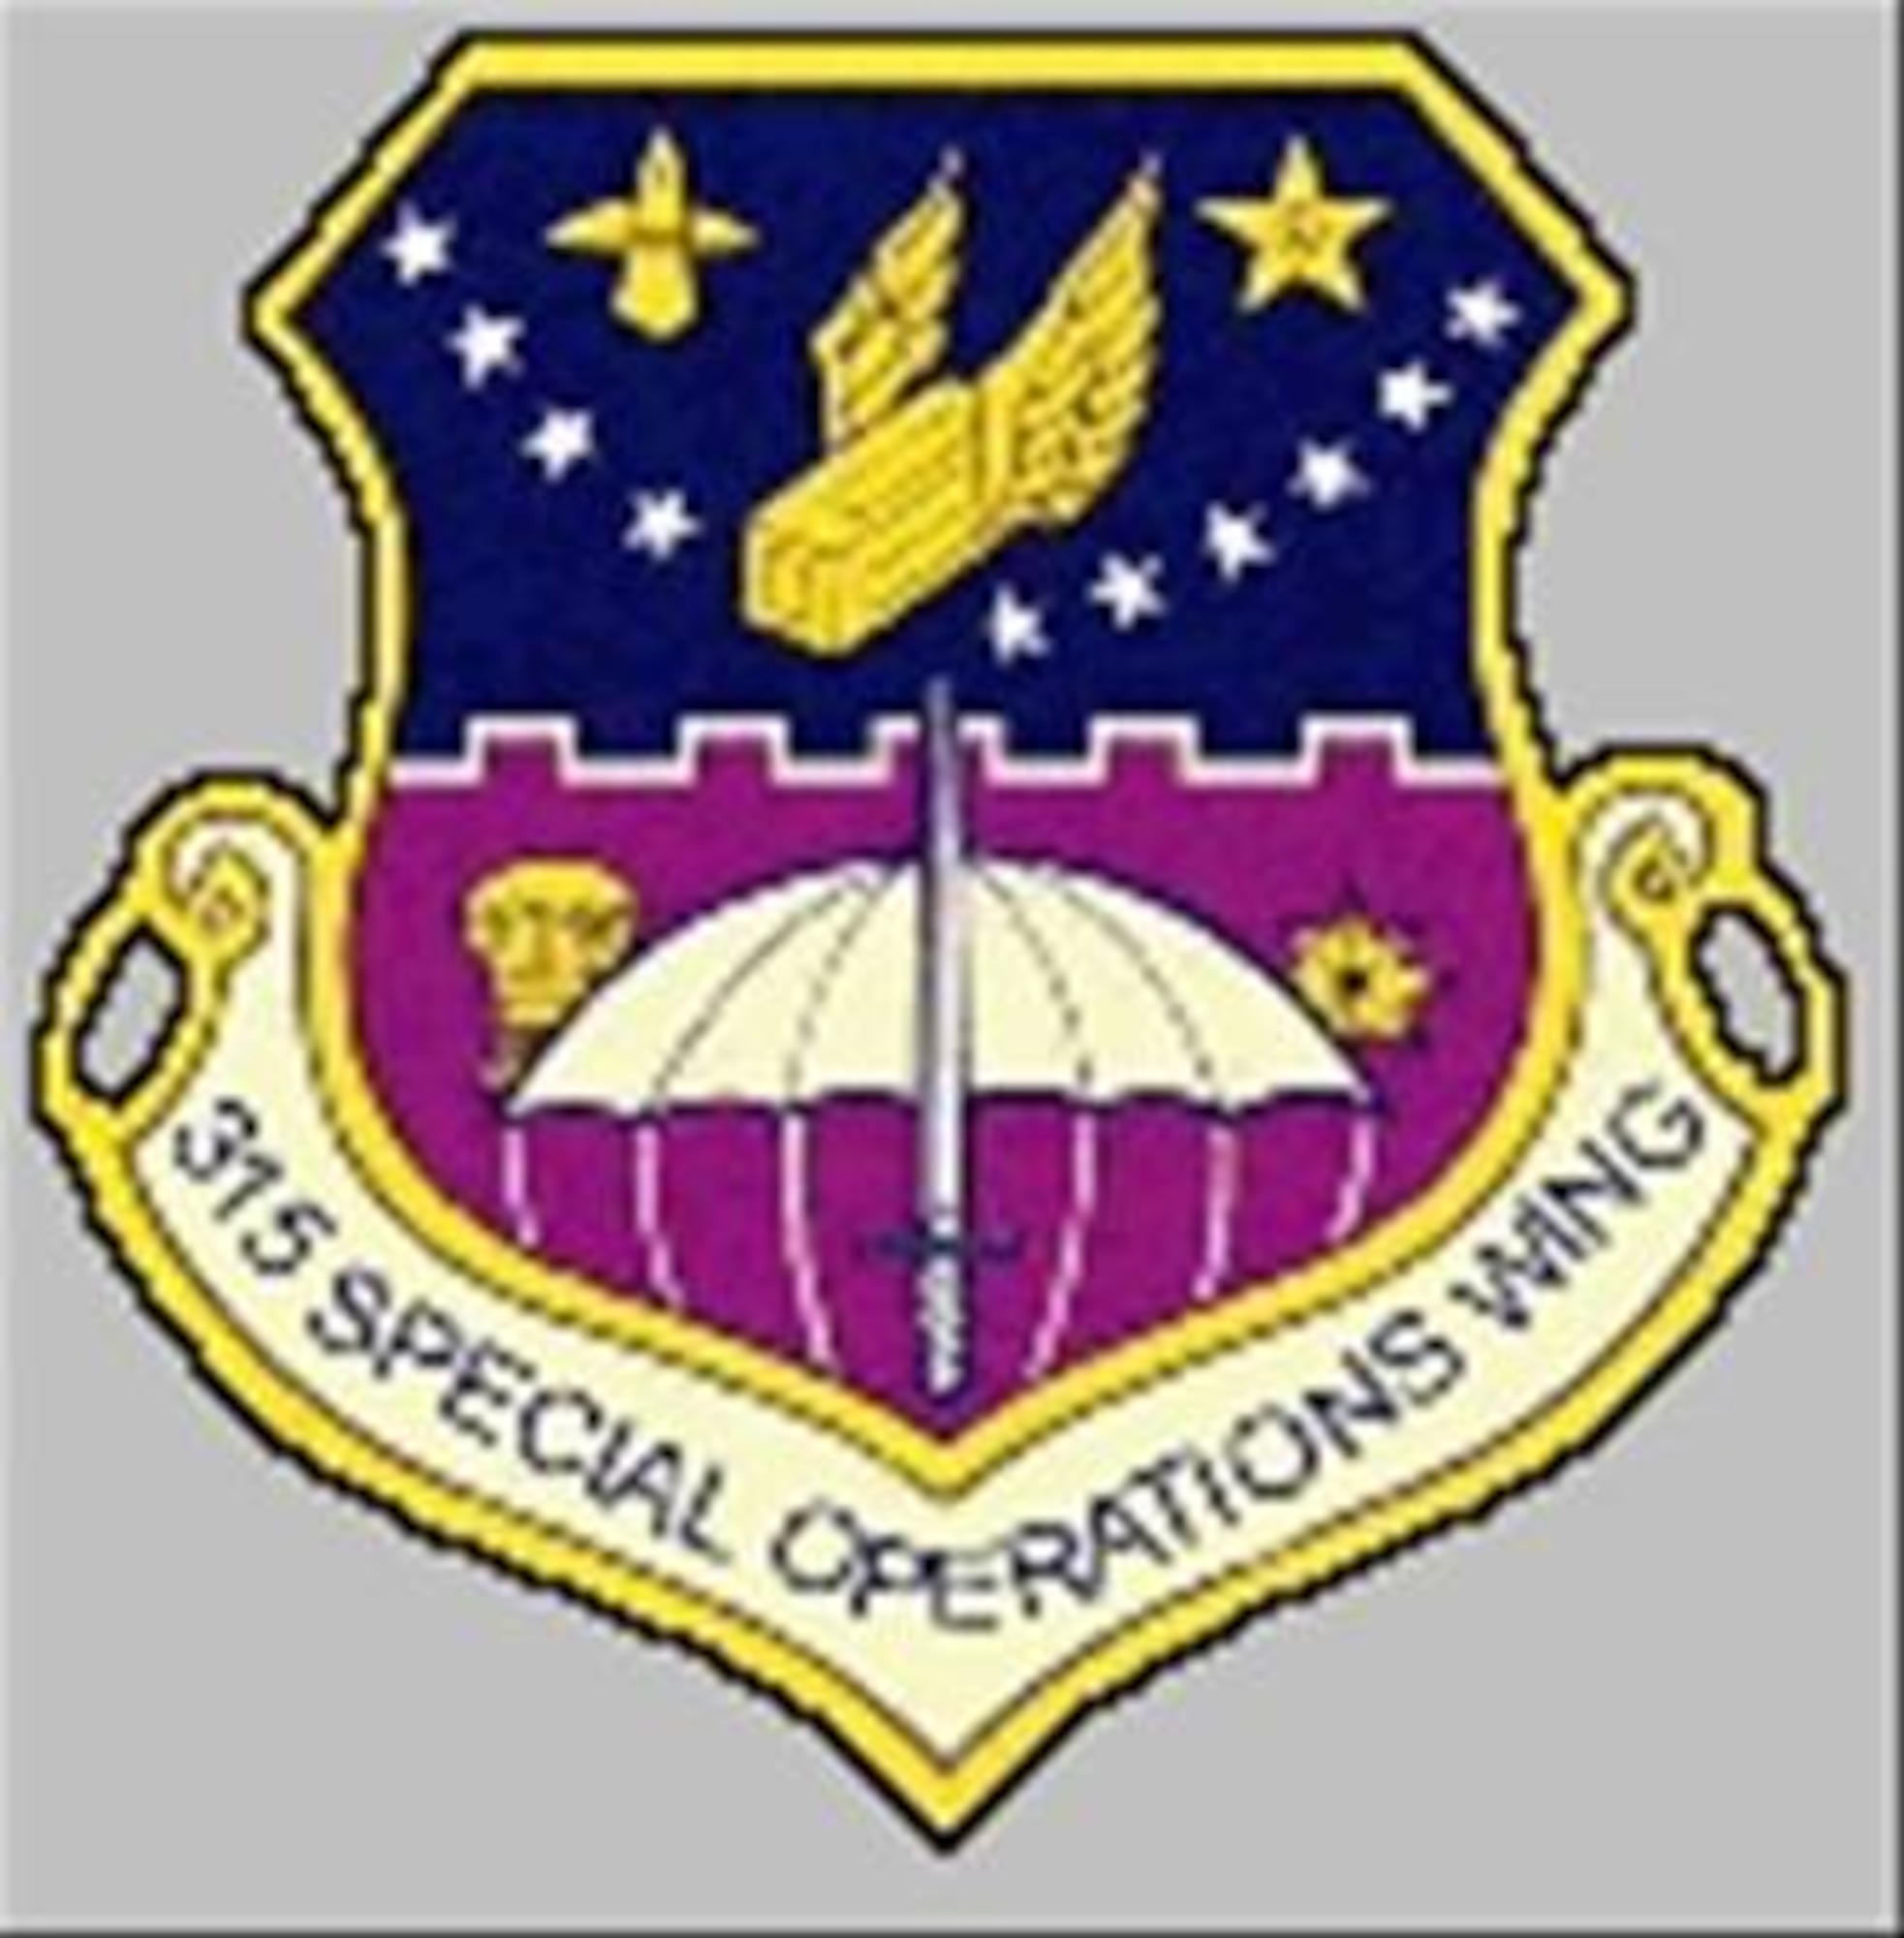 The 315 Special Operations Wing used this emblem from 1968 until 1970, when the 315 SOW was redesignated as the 315 Tactical Airlift Wing.  The emblem is identical to the one used by the 315 ACW.  